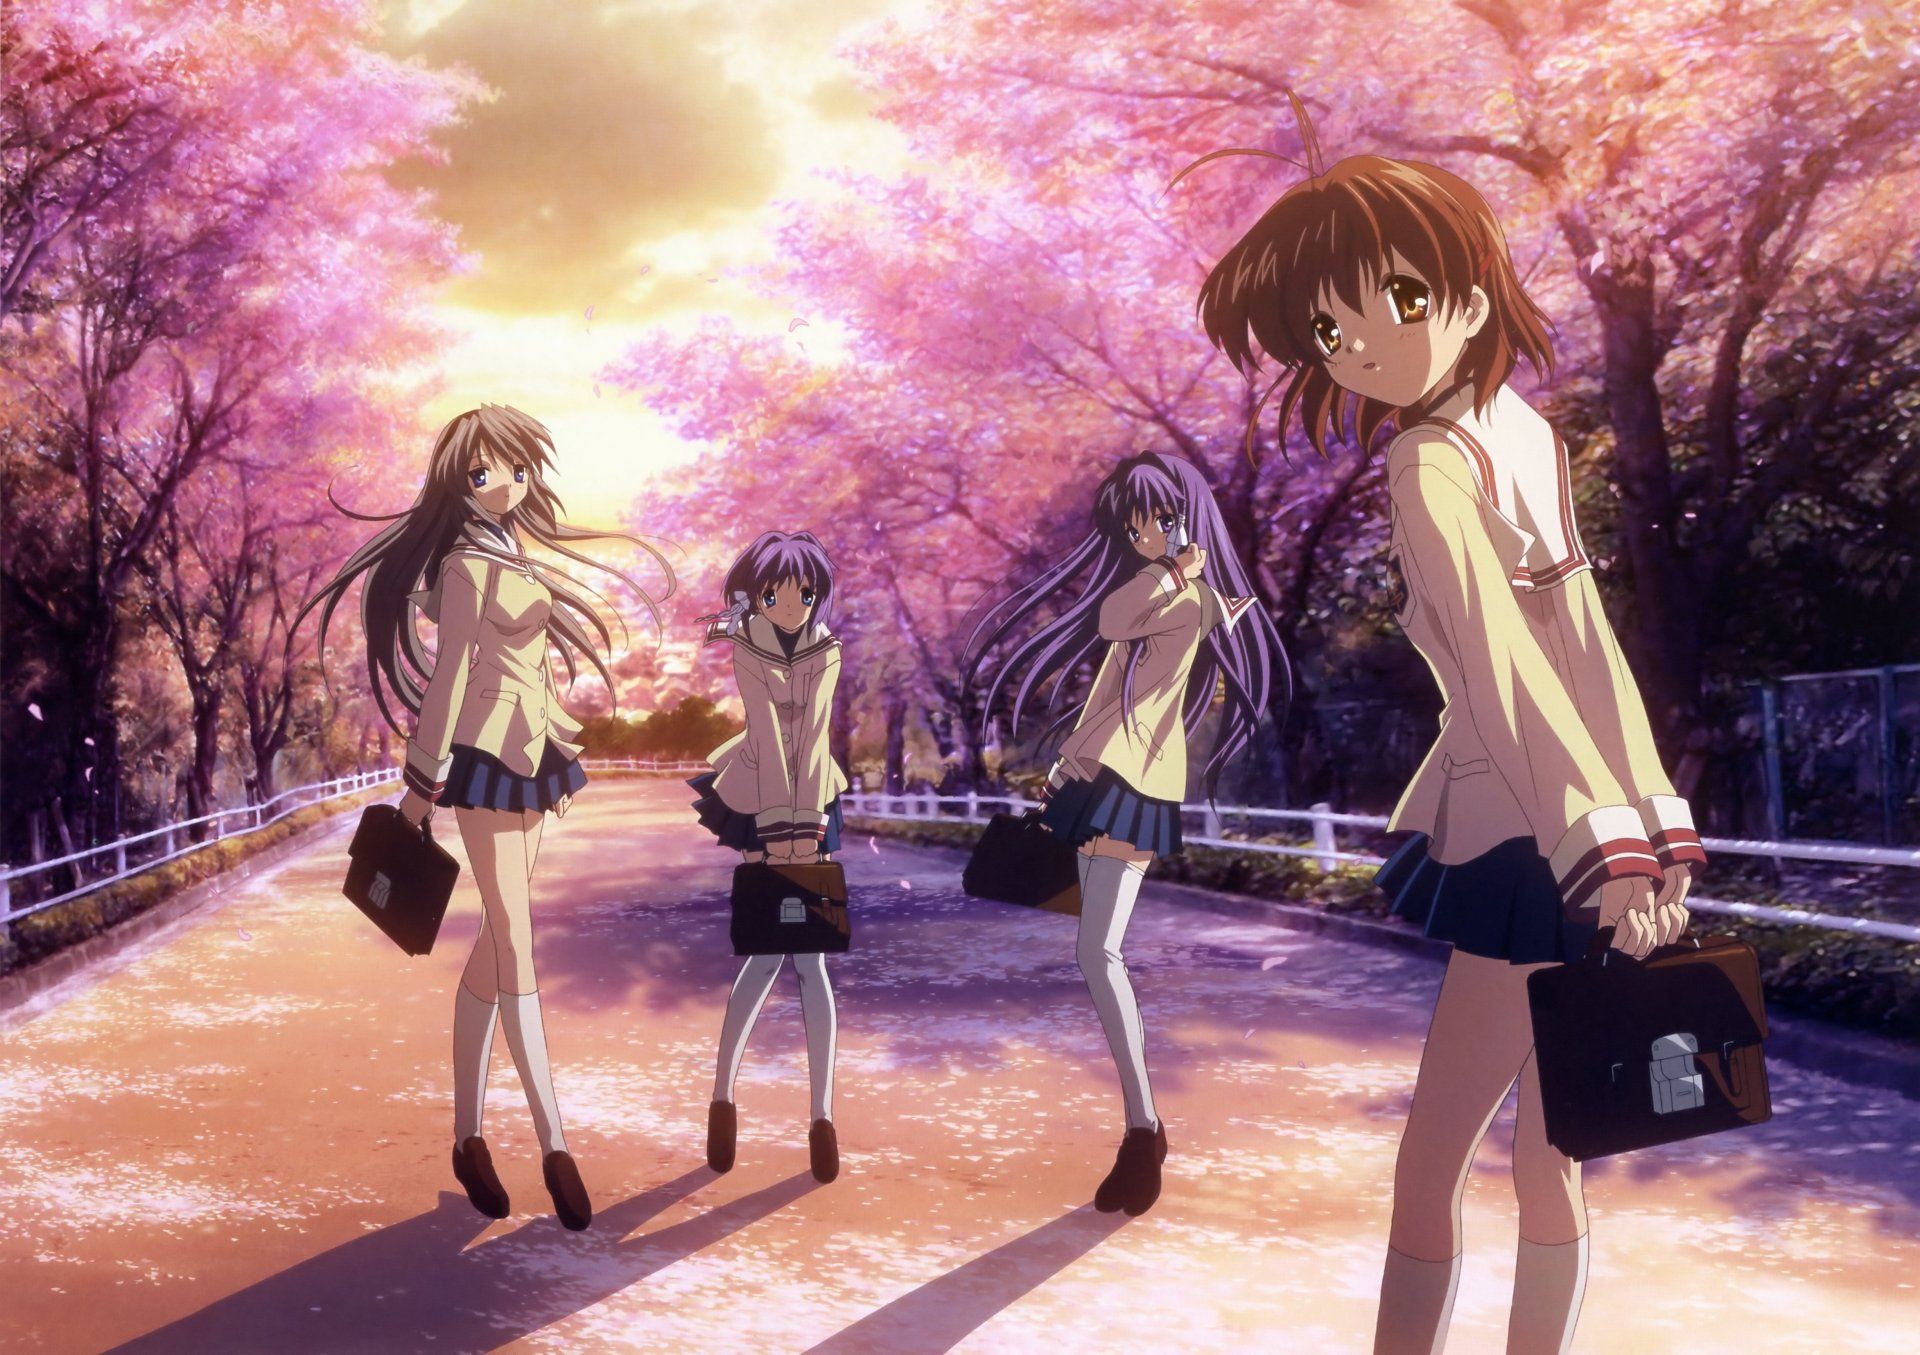 4K Ultra HD Clannad Wallpaper and Background Image